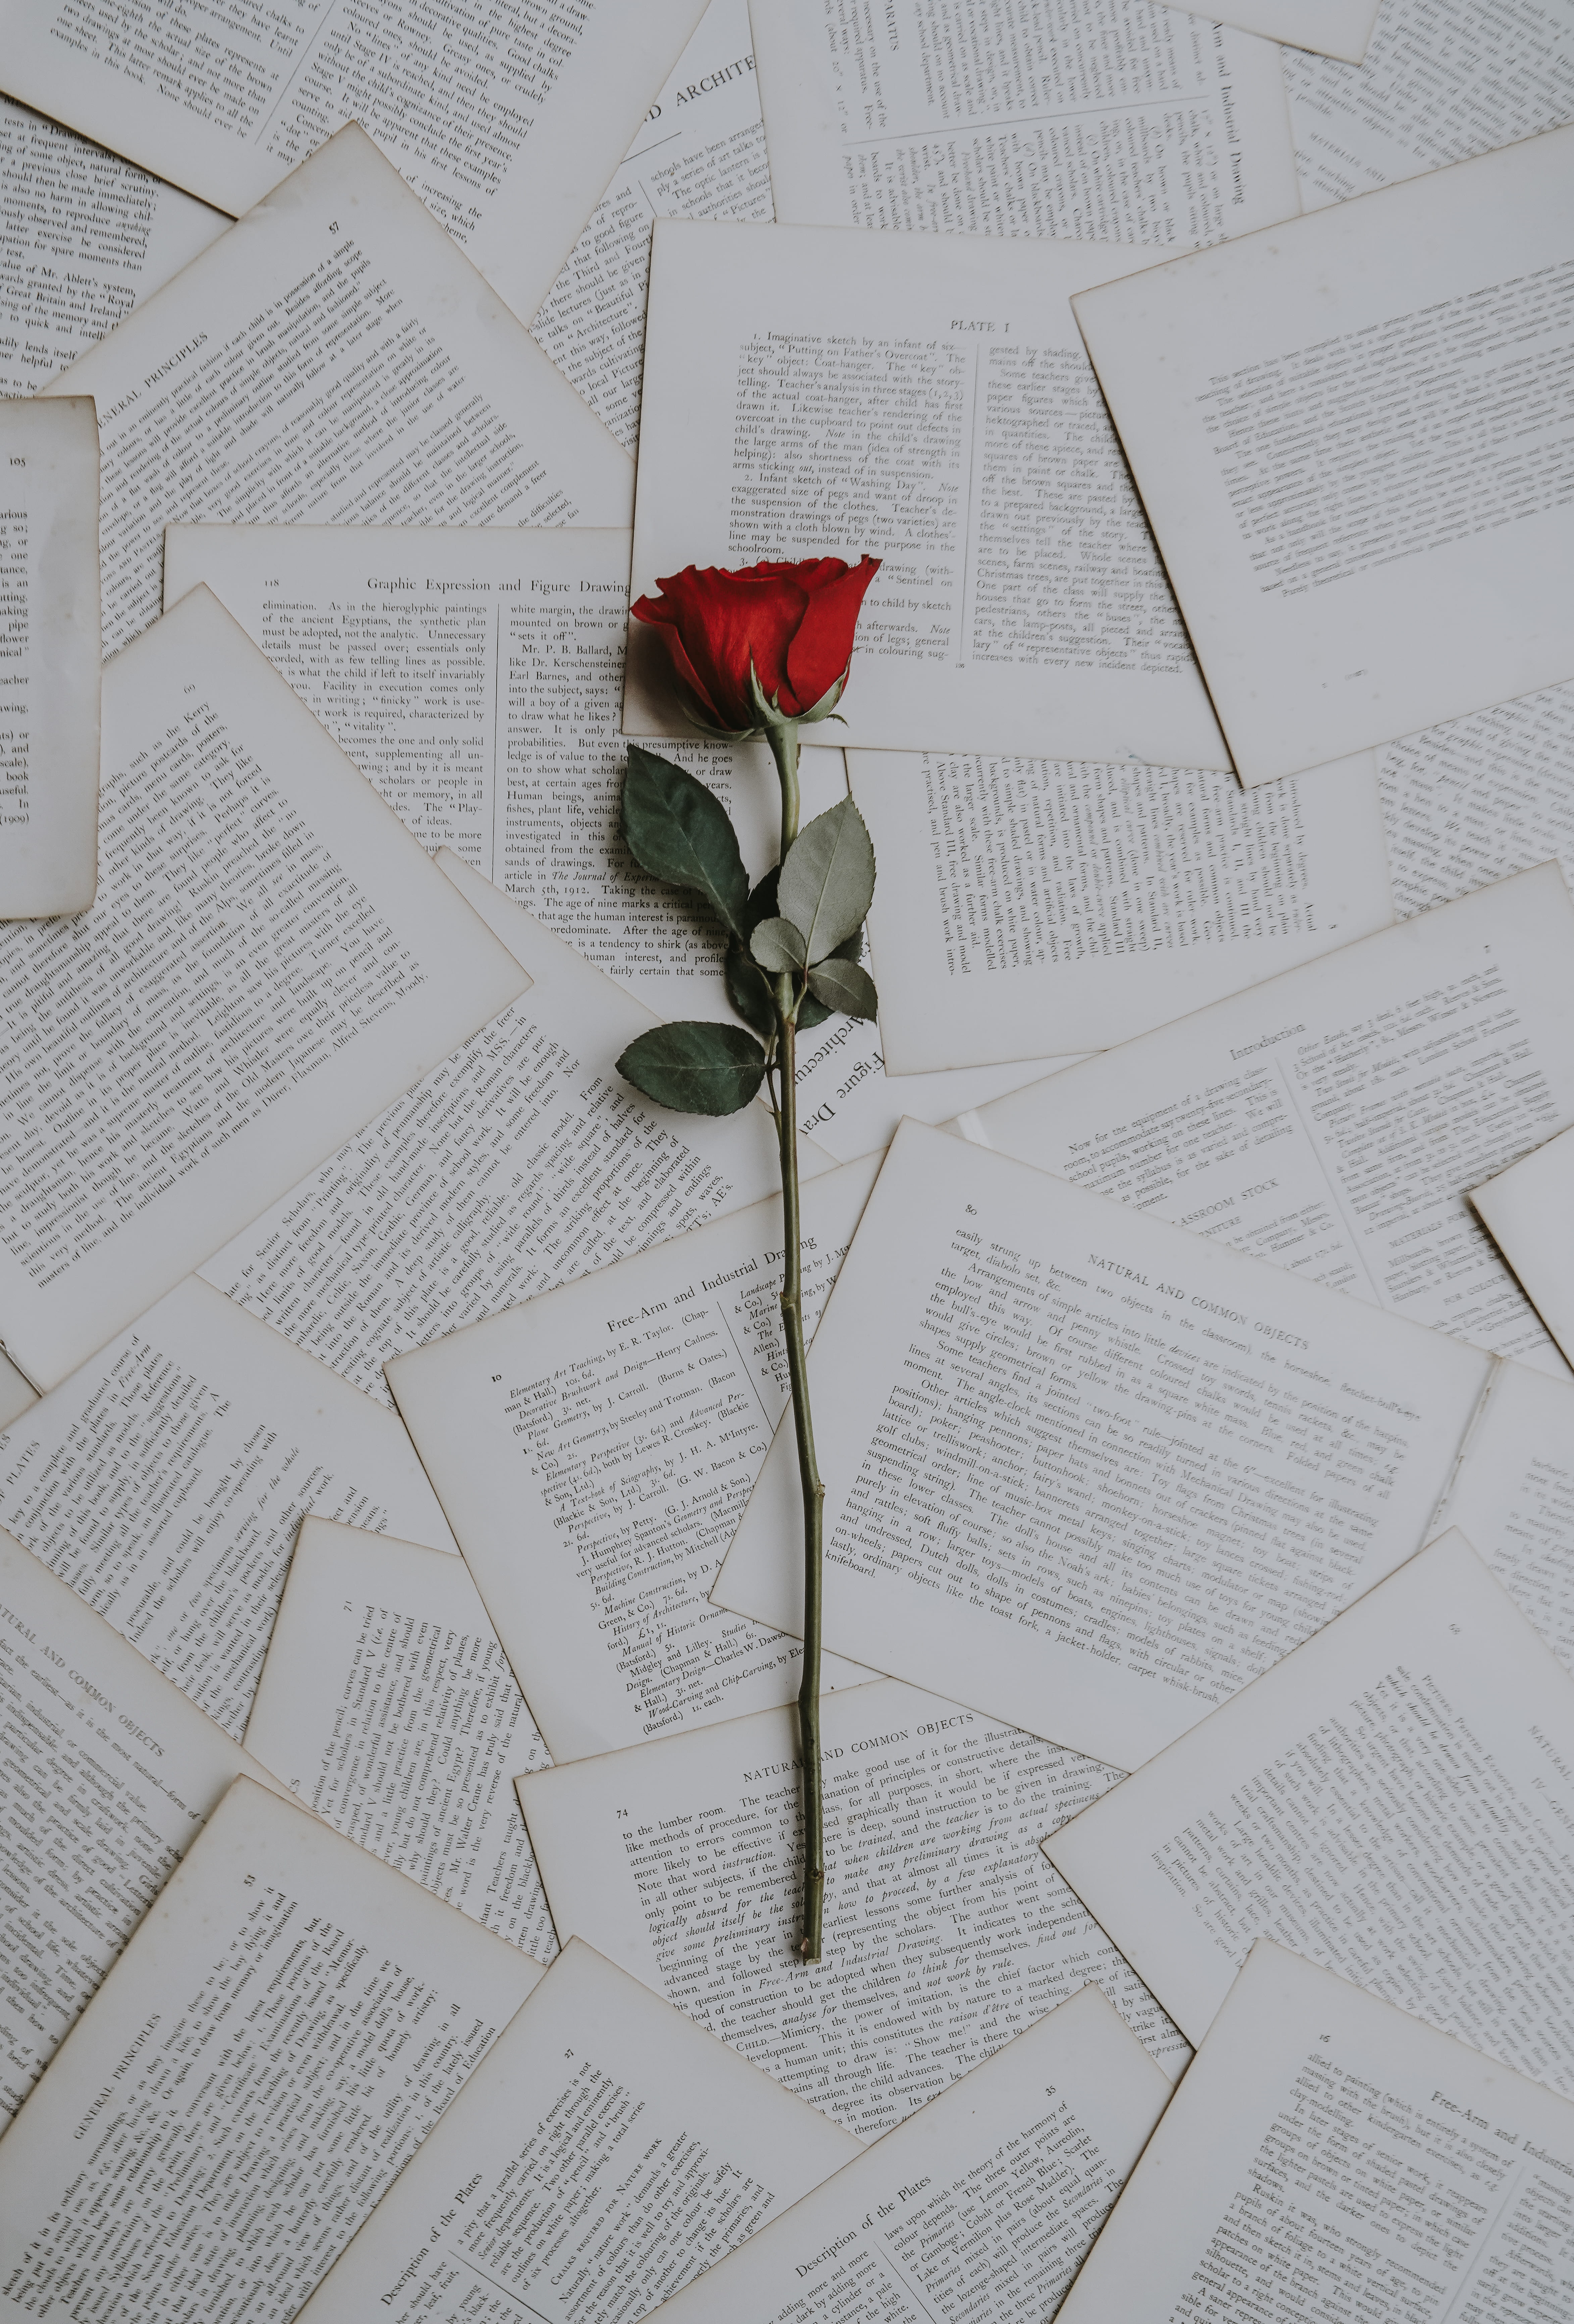 red rose on book sheets, red rose flower on white book pages